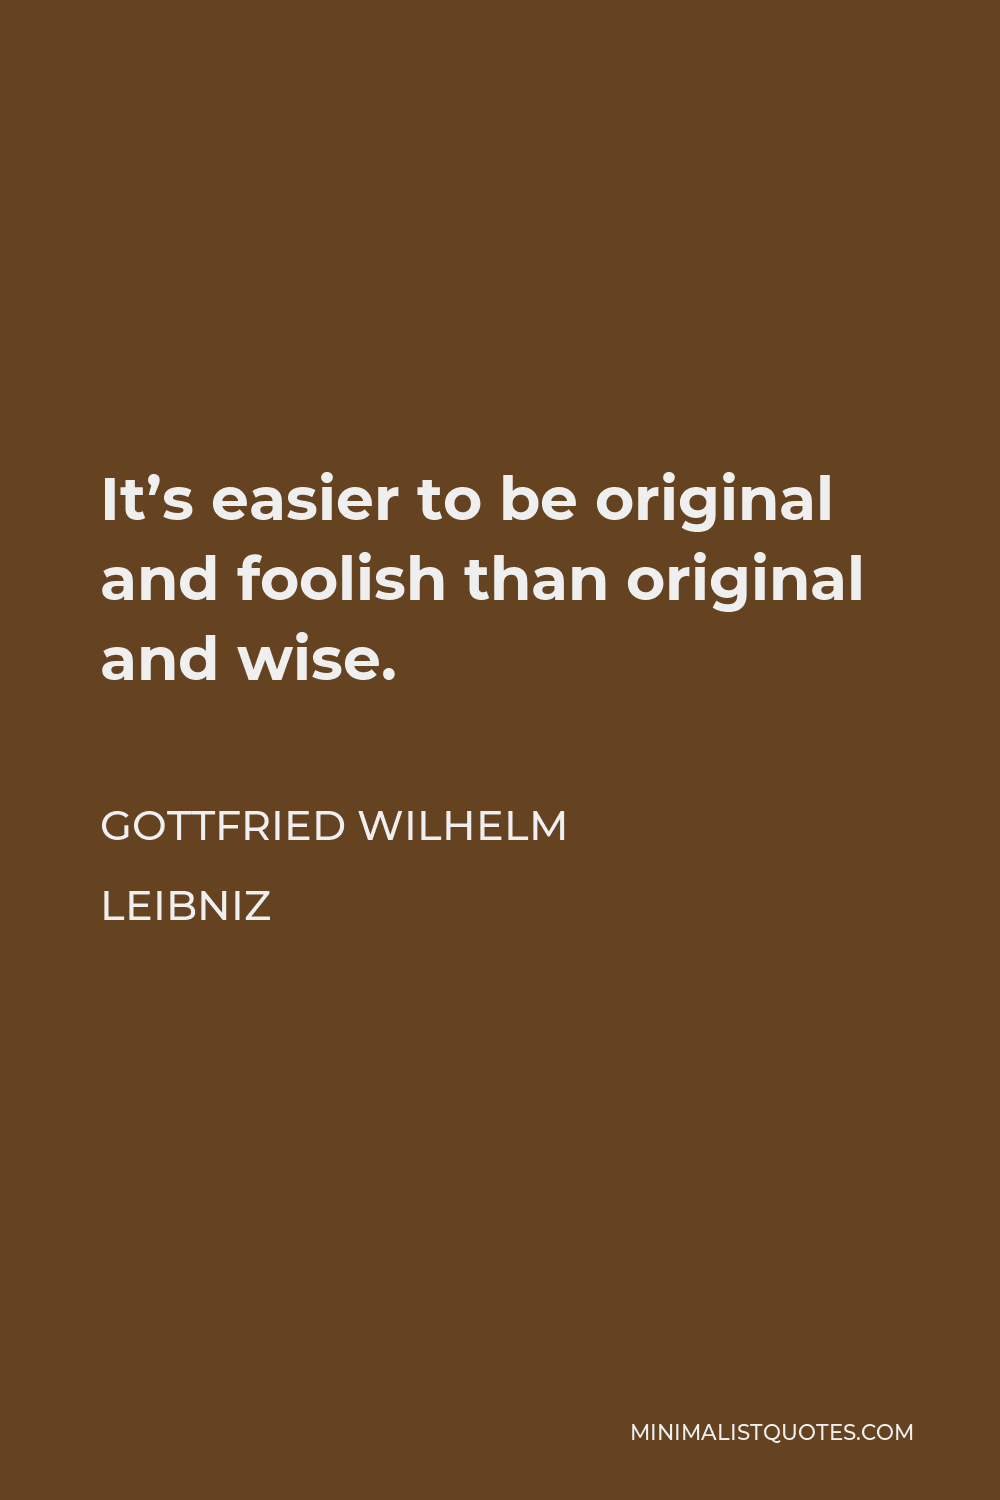 Gottfried Wilhelm Leibniz Quote - It’s easier to be original and foolish than original and wise.